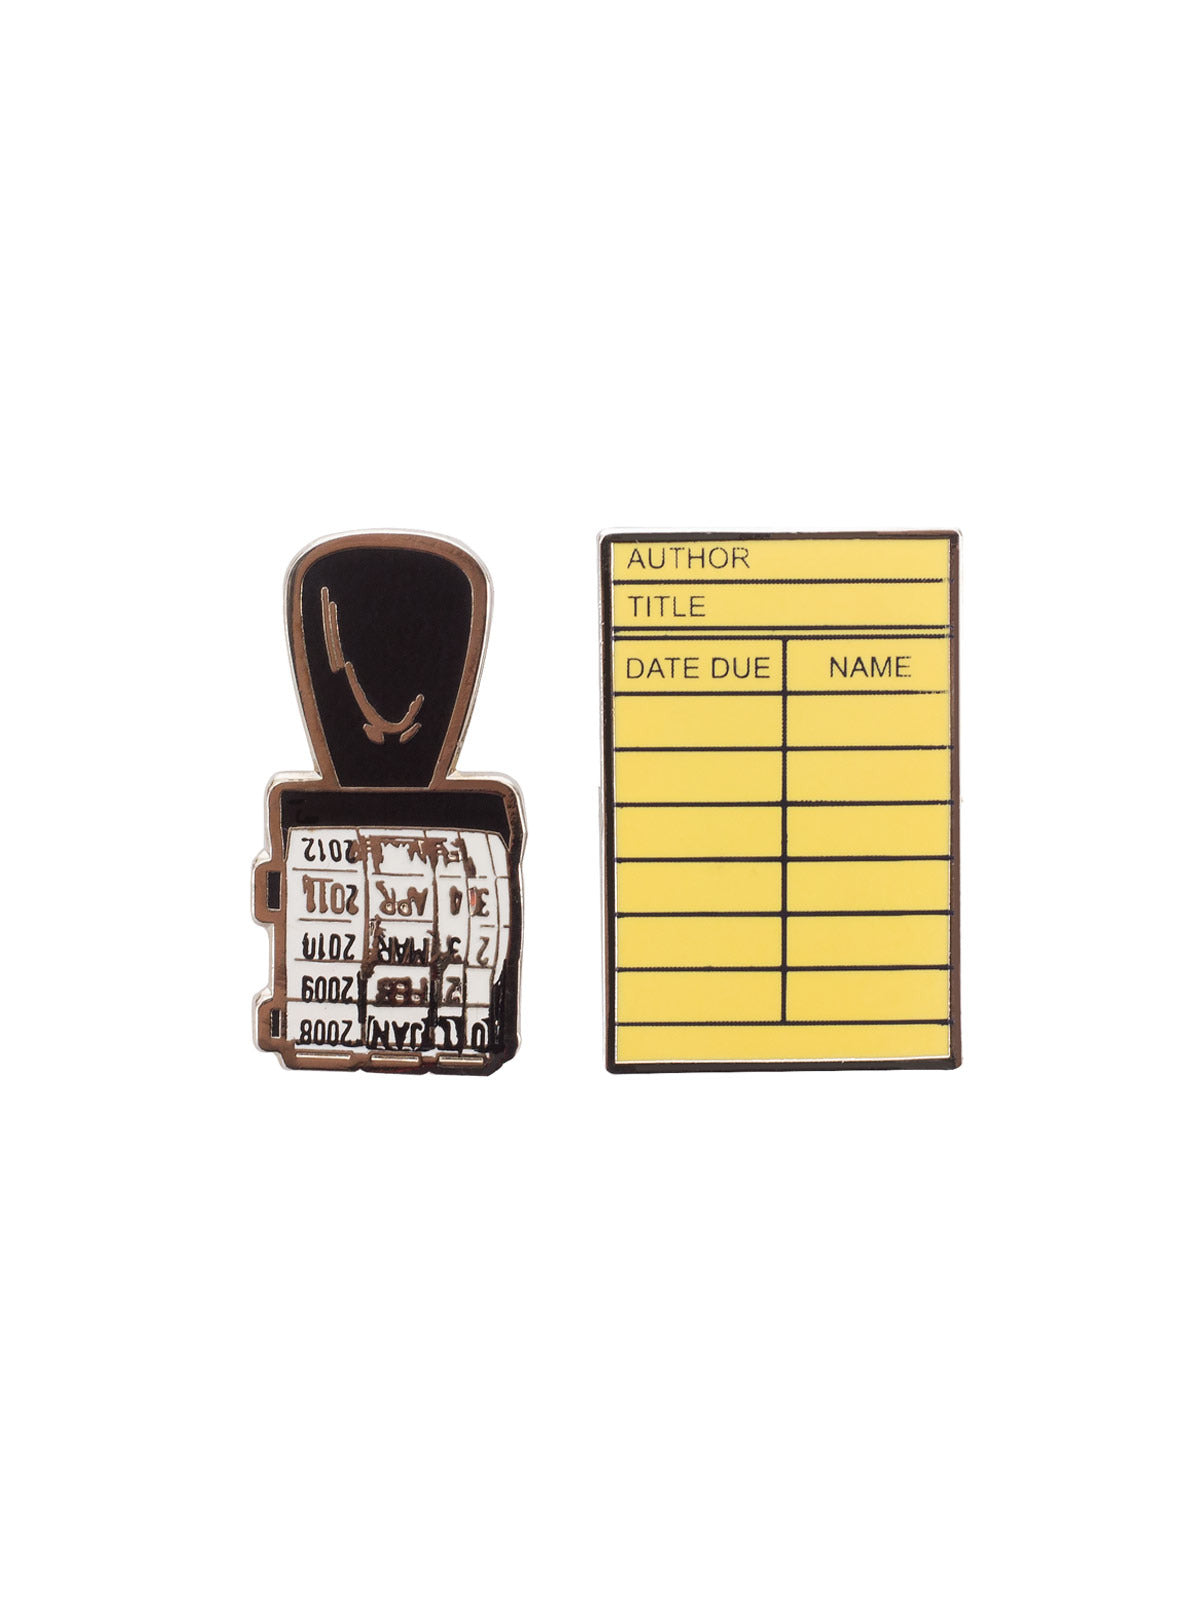 Two pins. One is shaped like a library stamp. The other is shaped like a library card.